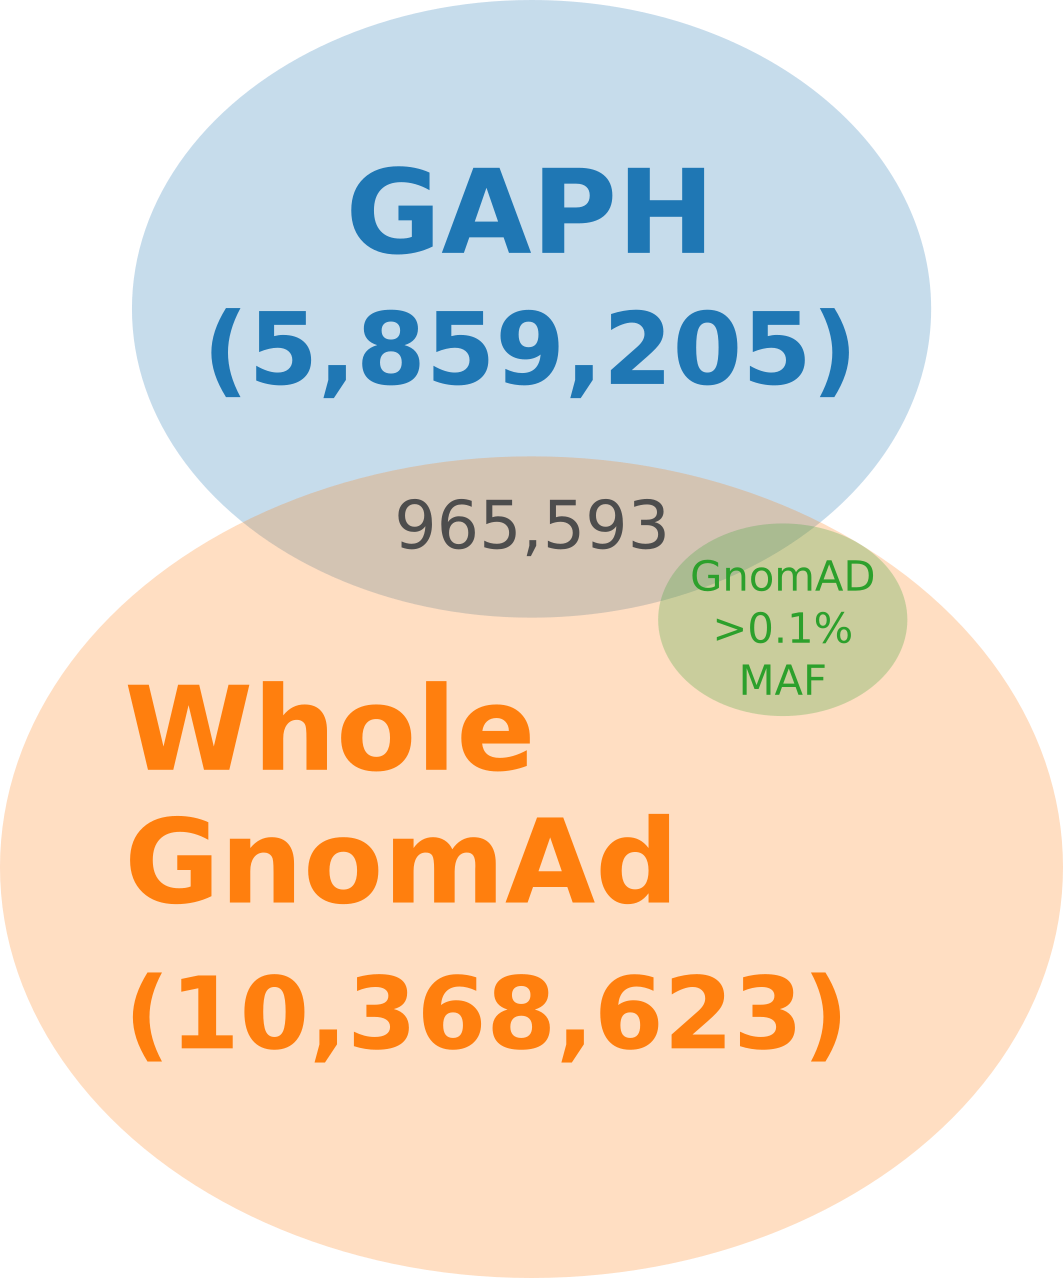 Venn diagram illustrating the overlap between GAPH-resulted set, variants found in GnomAD v3.1.2, and subset of GnomAD variants with minor allele frequency (MAF) > 0.1%.